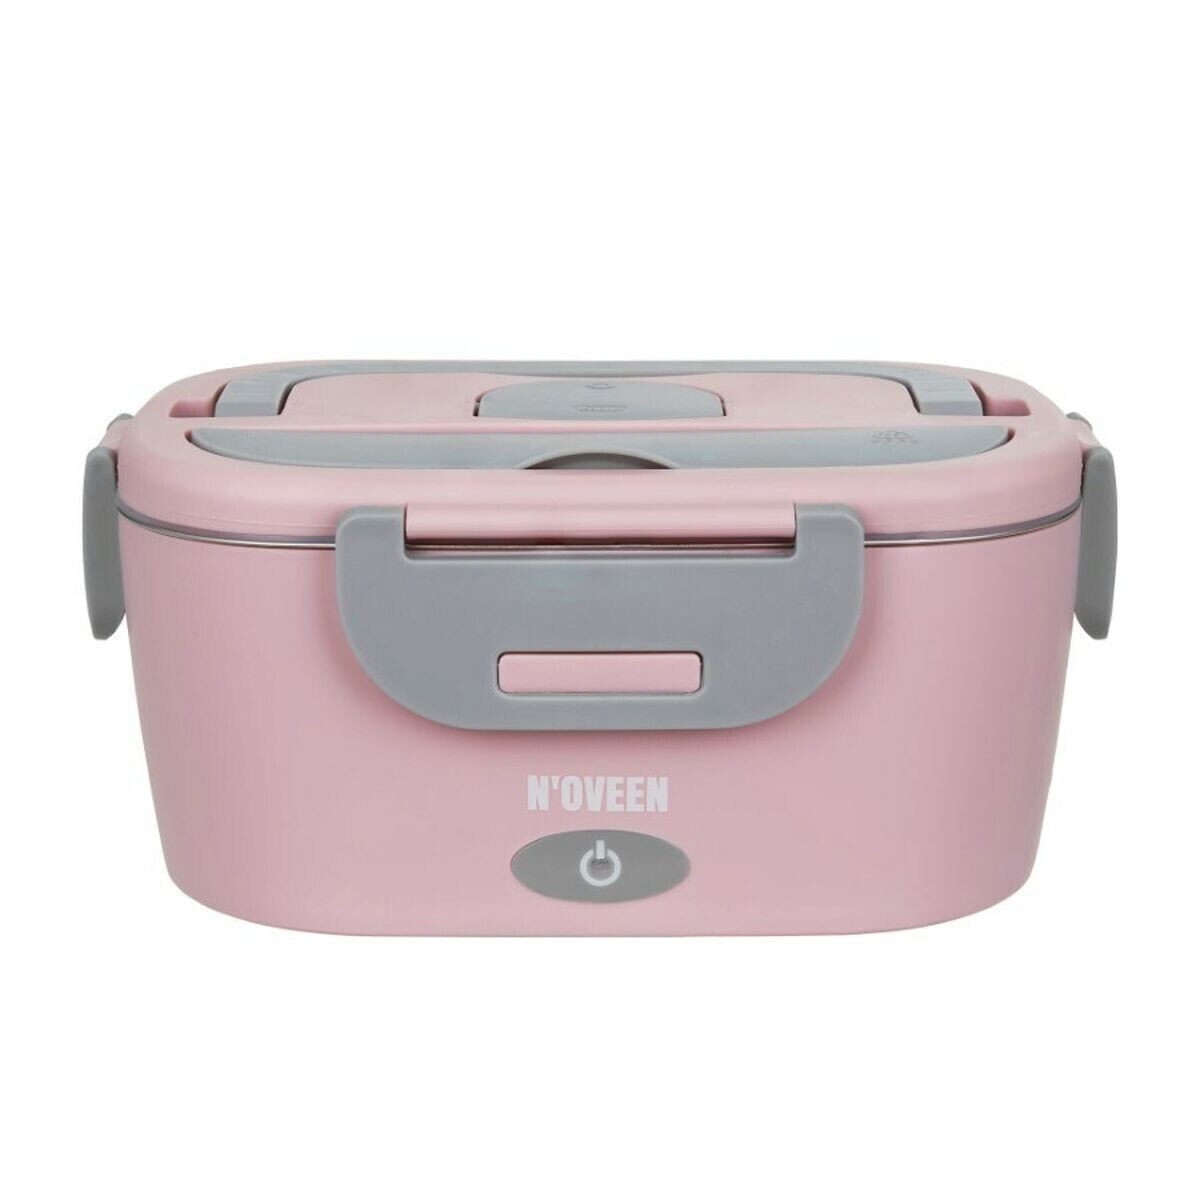 Lunch box N'oveen LB755 Grey Pink